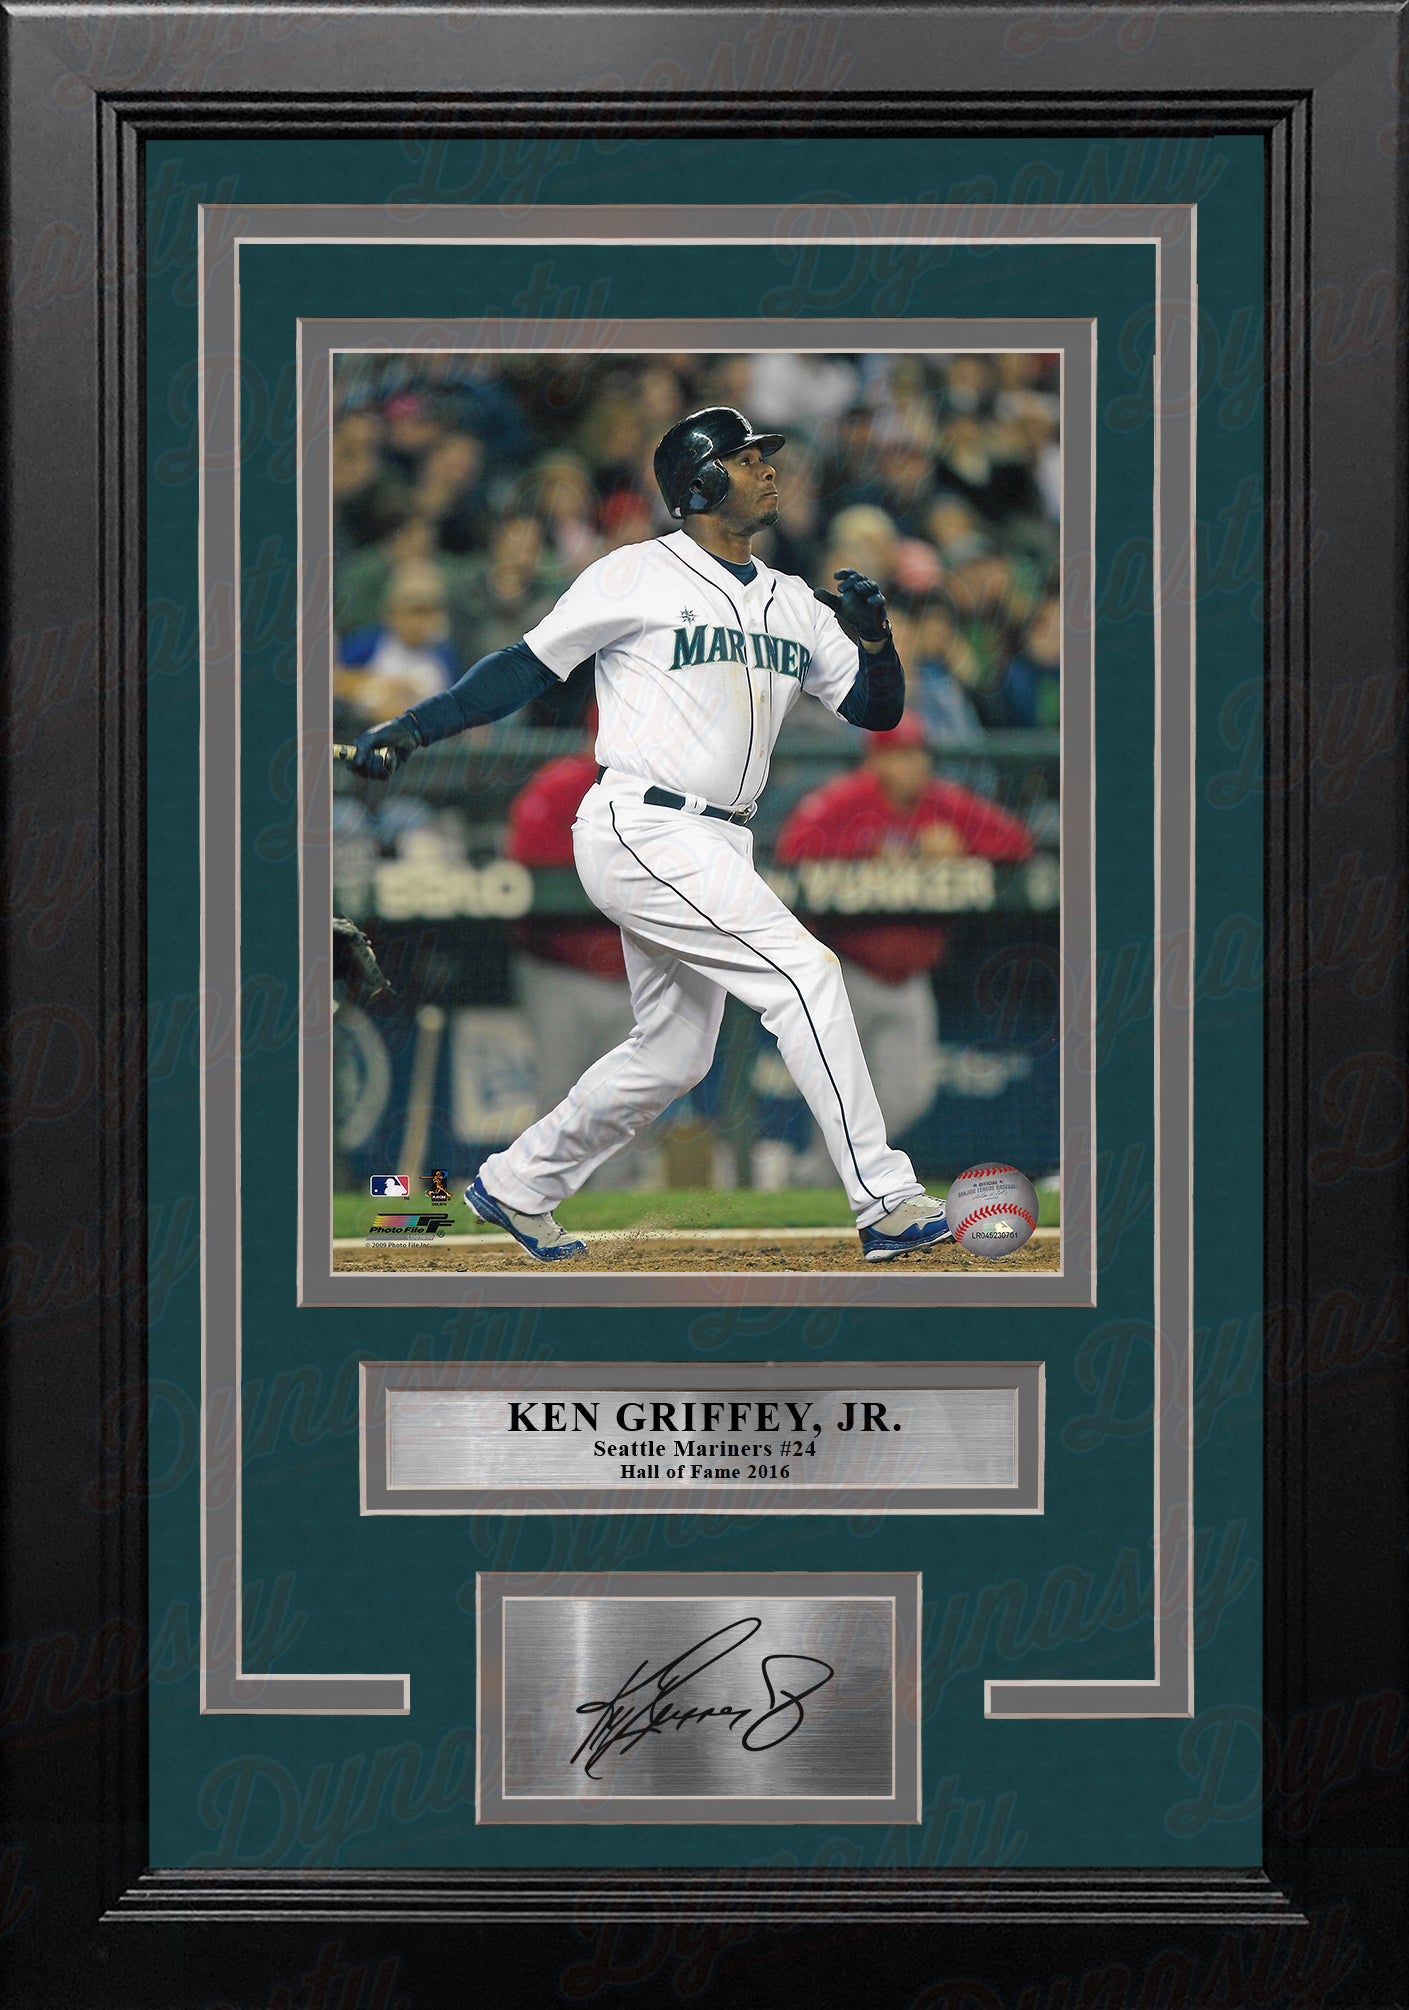 Ken Griffey Jr. Swing Seattle Mariners 8 x 10 Framed Baseball Photo with  Engraved Autograph